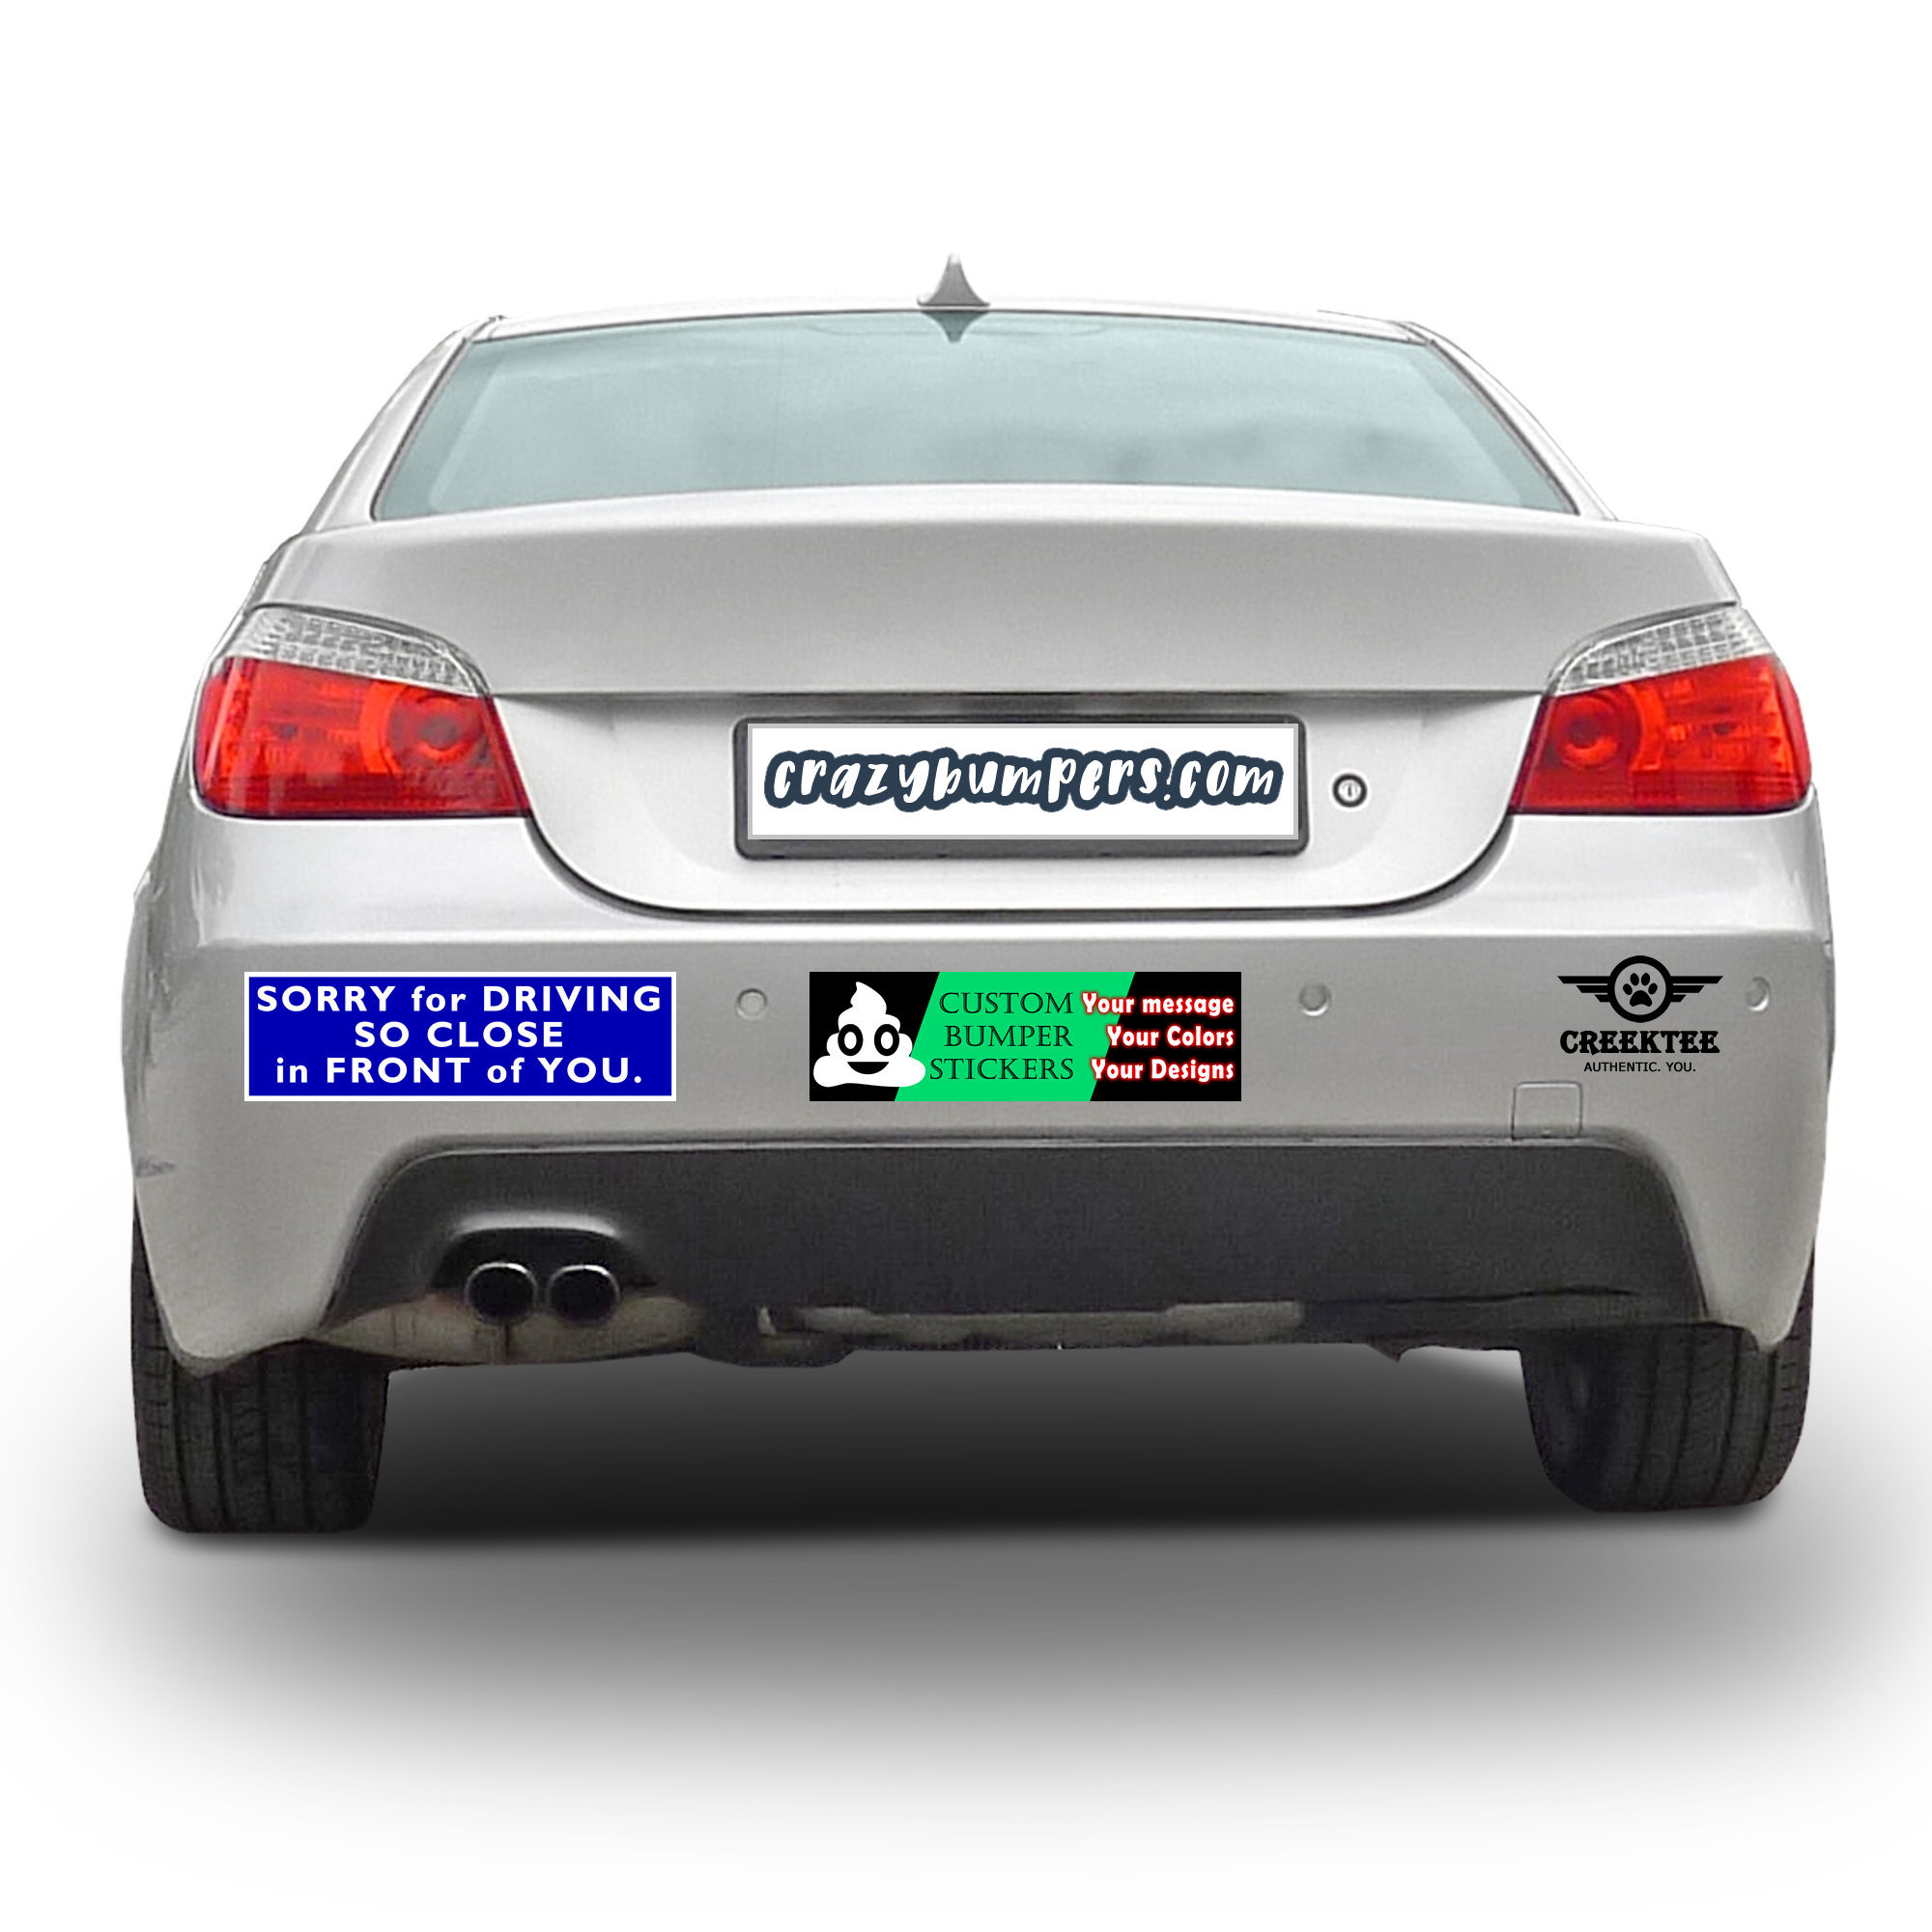 Sorry For Driving So Close In Front Of You 10 x 3 Bumper Sticker or Magnetic Bumper Sticker Available - Custom changes and orders welcomed!